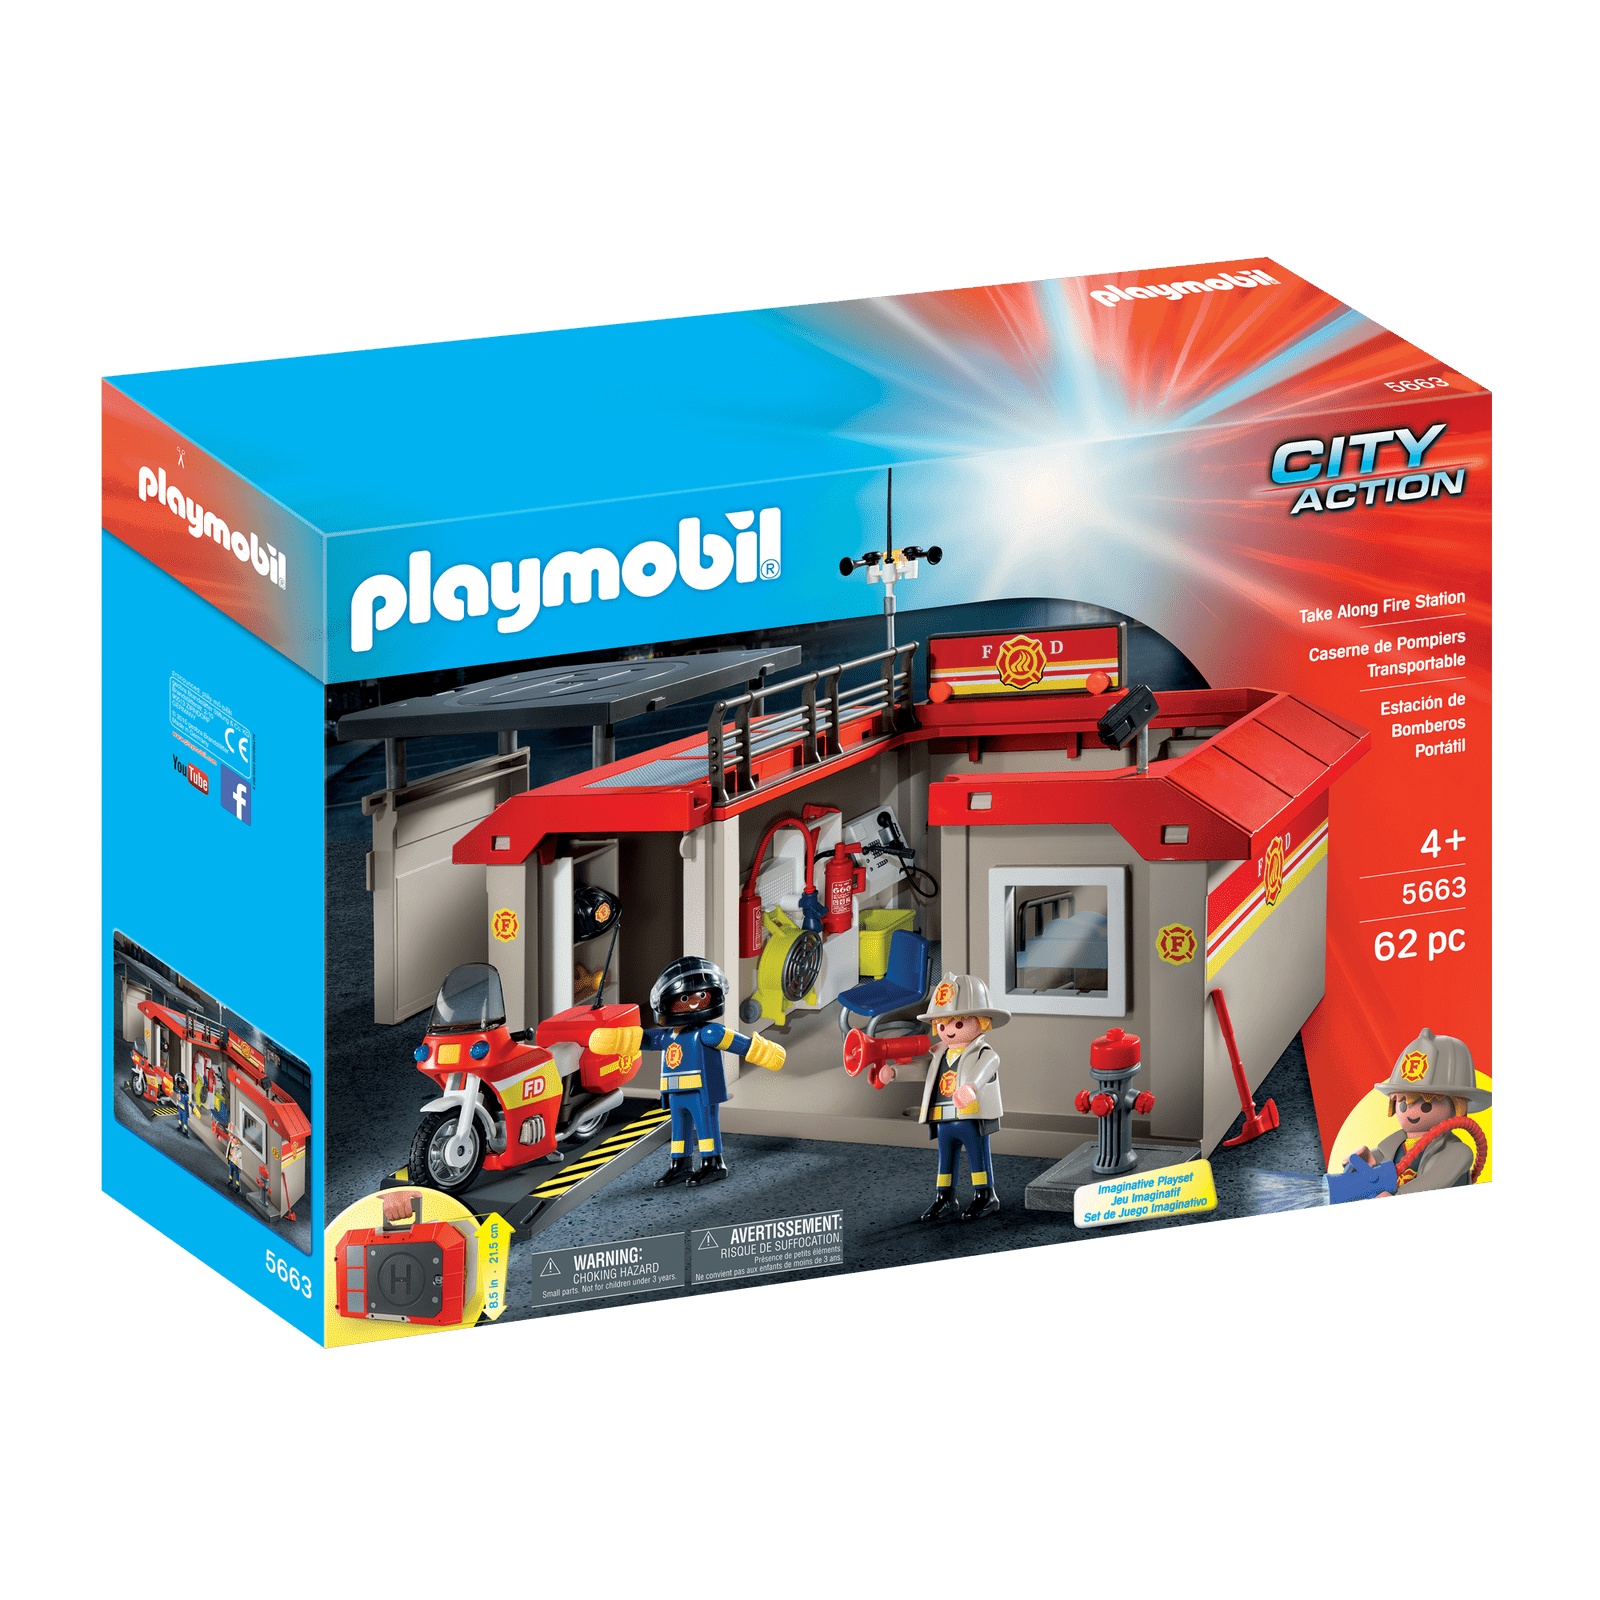 Playmobil-City Action - Take Along Fire Station-5663-Legacy Toys